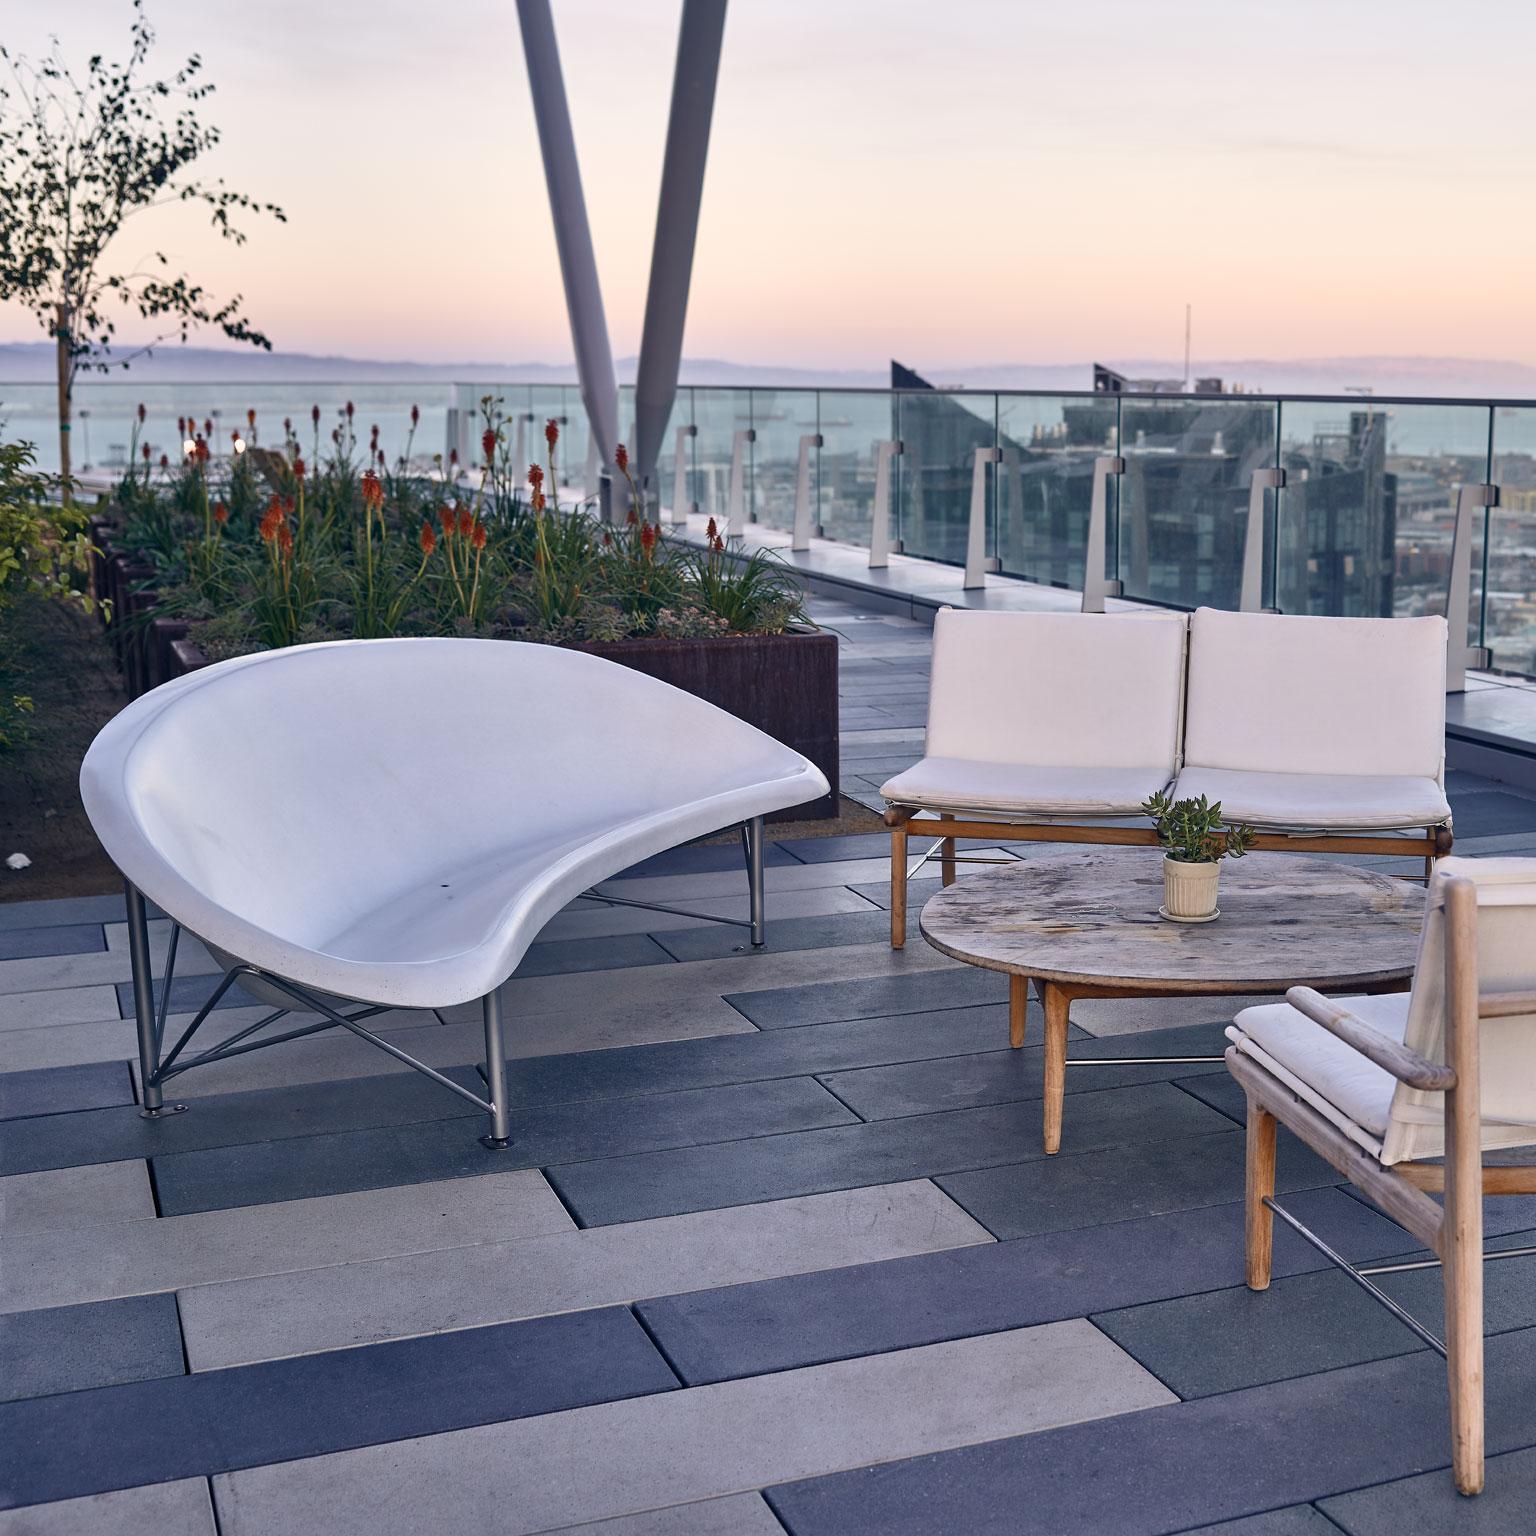 The Helios Metreo is a revolutionary piece of heated furniture made of cast stone and stainless steel by Galanter & Jones. Our newest multi-seater, the Metreo is a little smaller than the Helios Lounge and a little bigger than the Helios Love Chair.